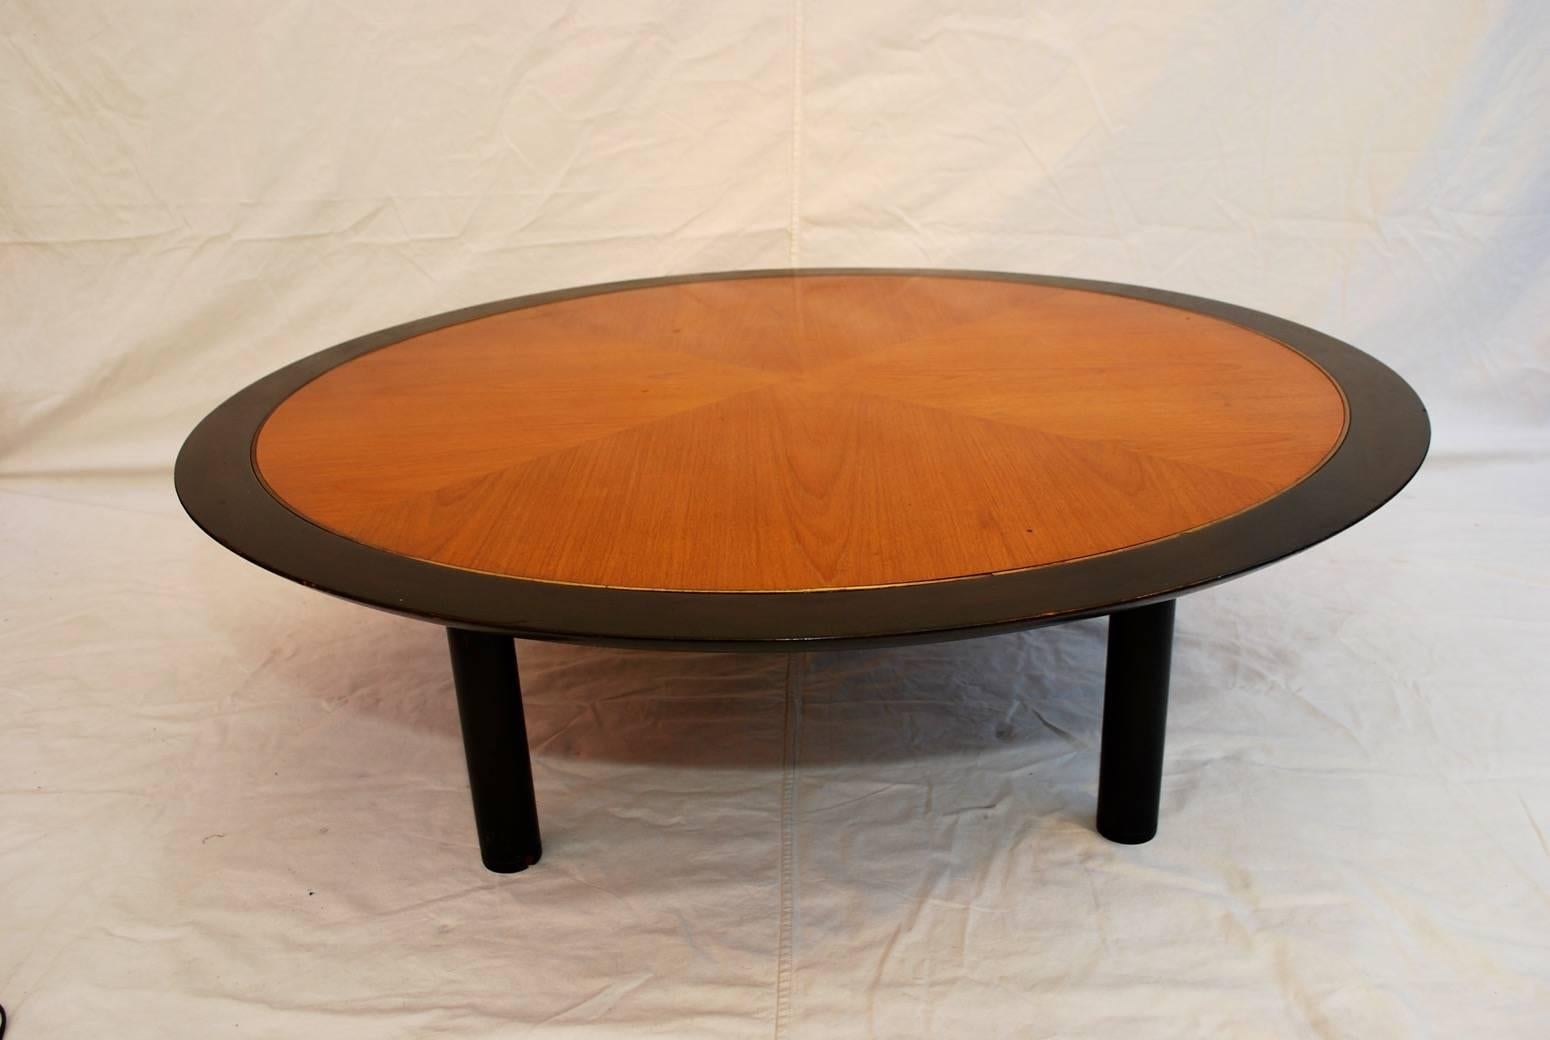 A beautiful coffee table by Baker, it has the ebonized wood with an inlaid brass and a beautiful walnut wood inlaid.